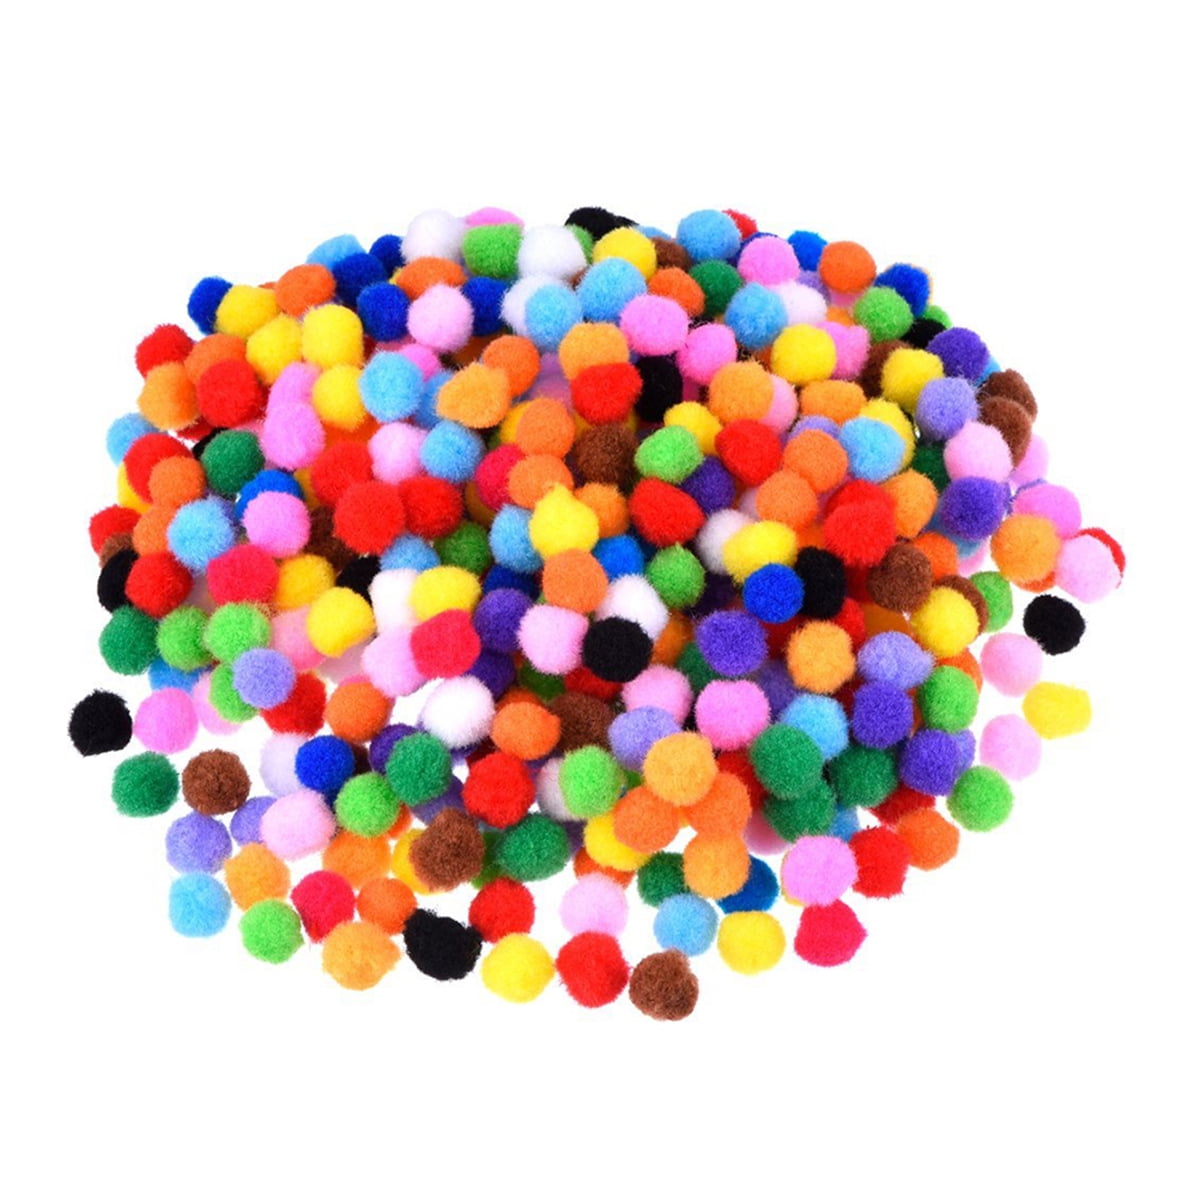 Adeweave 1.5 Inch 100 Pom Poms - Multicolor Pompoms for Crafts in Assorted  Colors Soft and Fluffy Large pom poms for Crafts in Reusable Zipper Bag